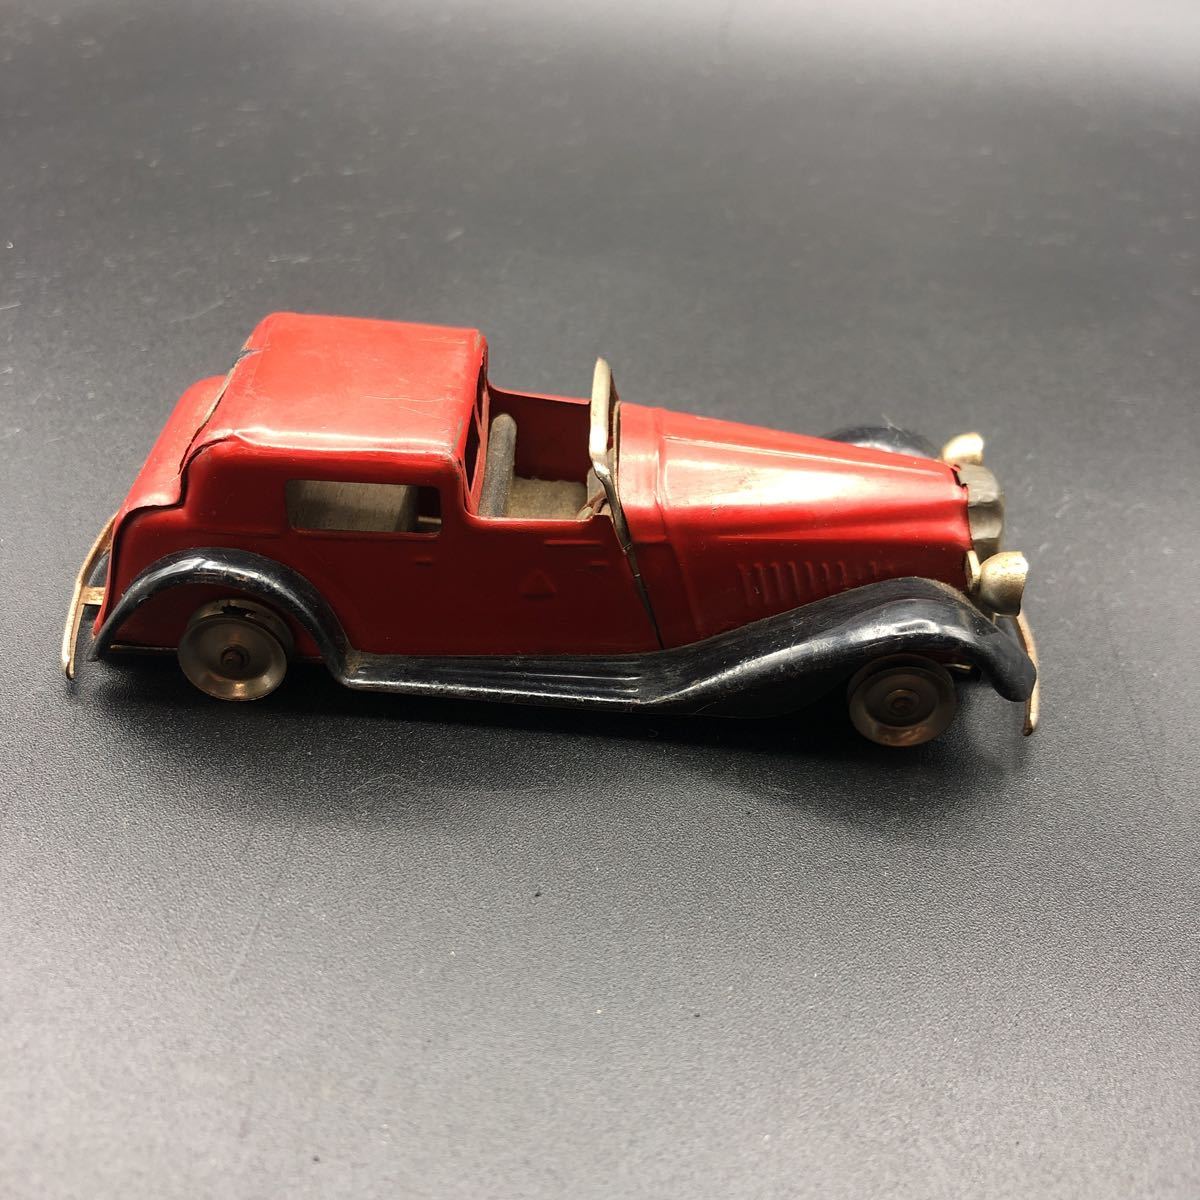 7M pre-war Town Coupe レトロ　ブリキ　MINIC TOYS TRI-ANG 超希少_画像3